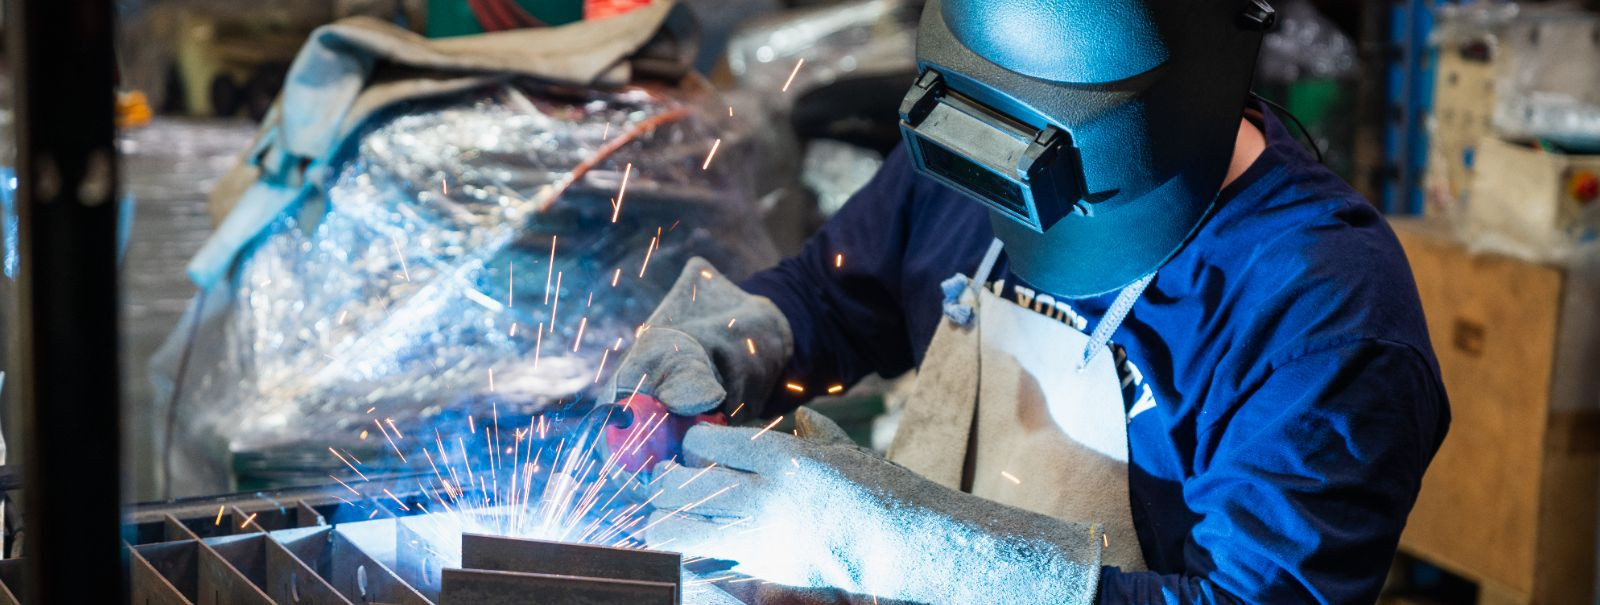 Metal Inert Gas (MIG) and Metal Active Gas (MAG) welding are two of the most popular welding processes used today. They are both forms of Gas Metal Arc Welding 